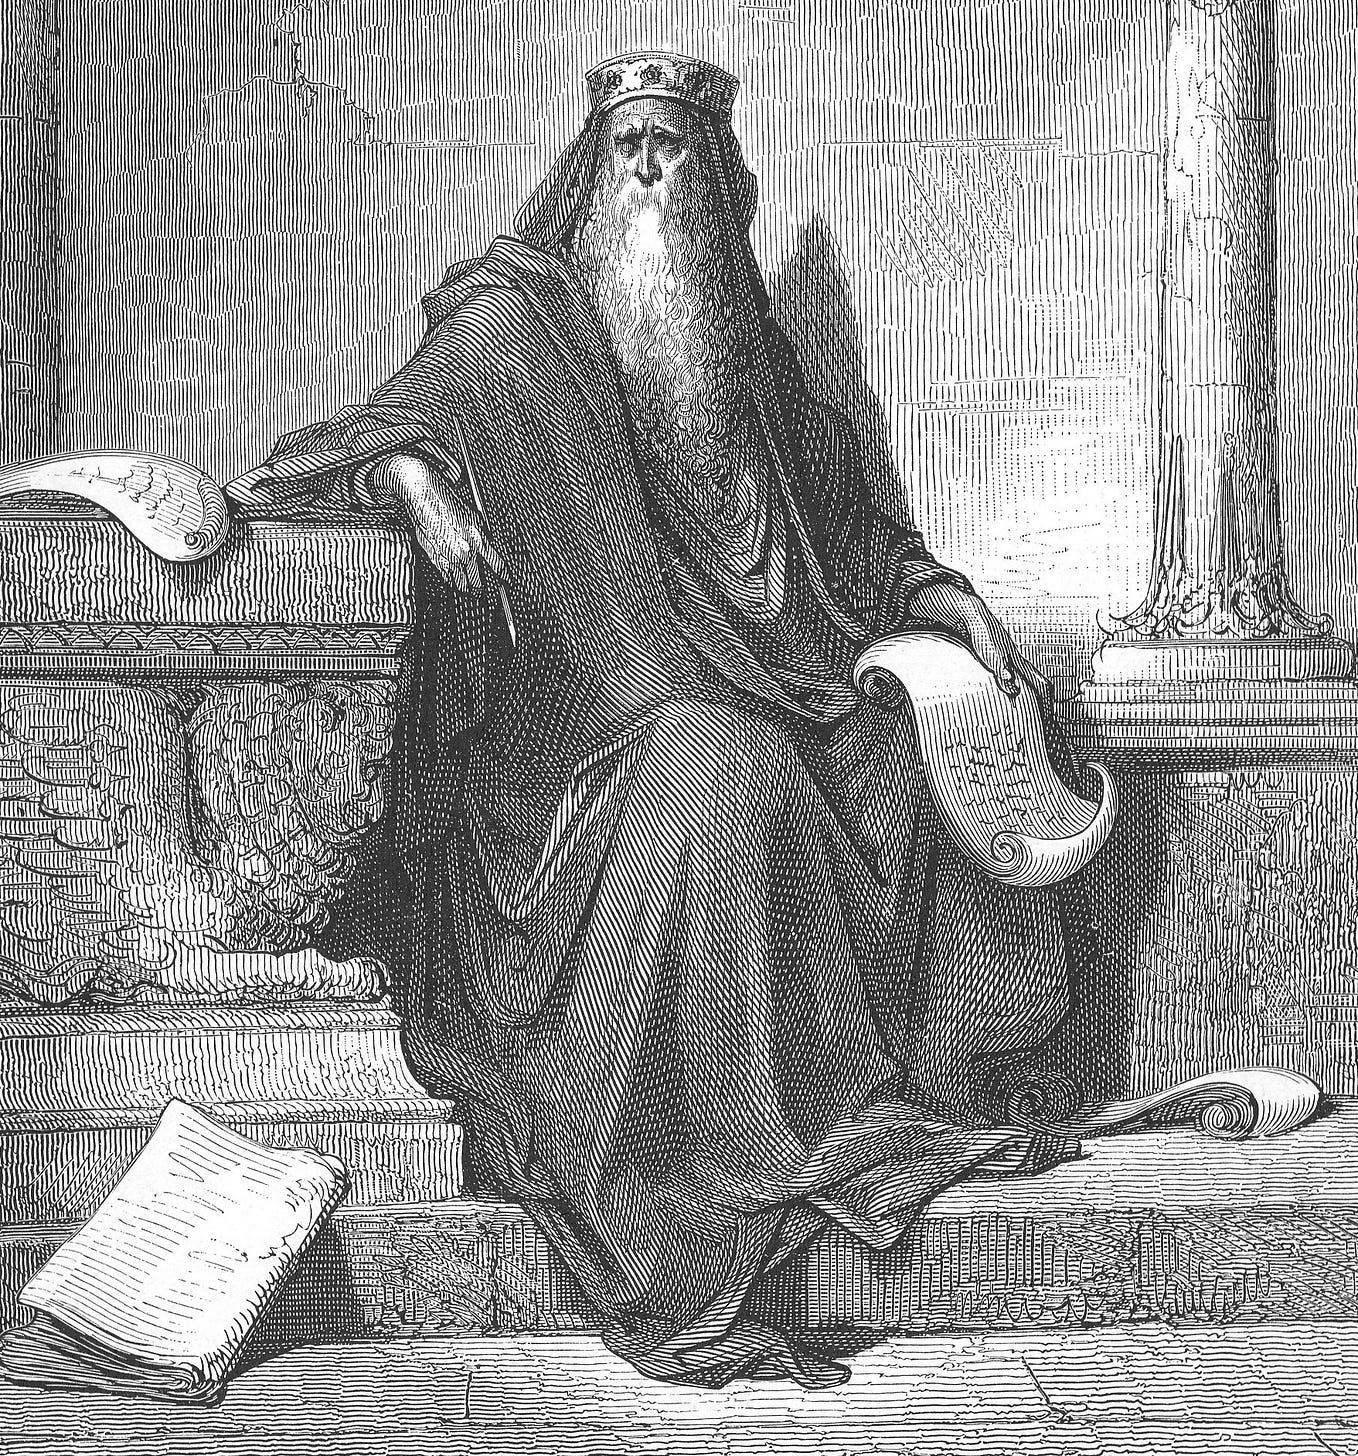 The Existential Philosophy of Ecclesiastes